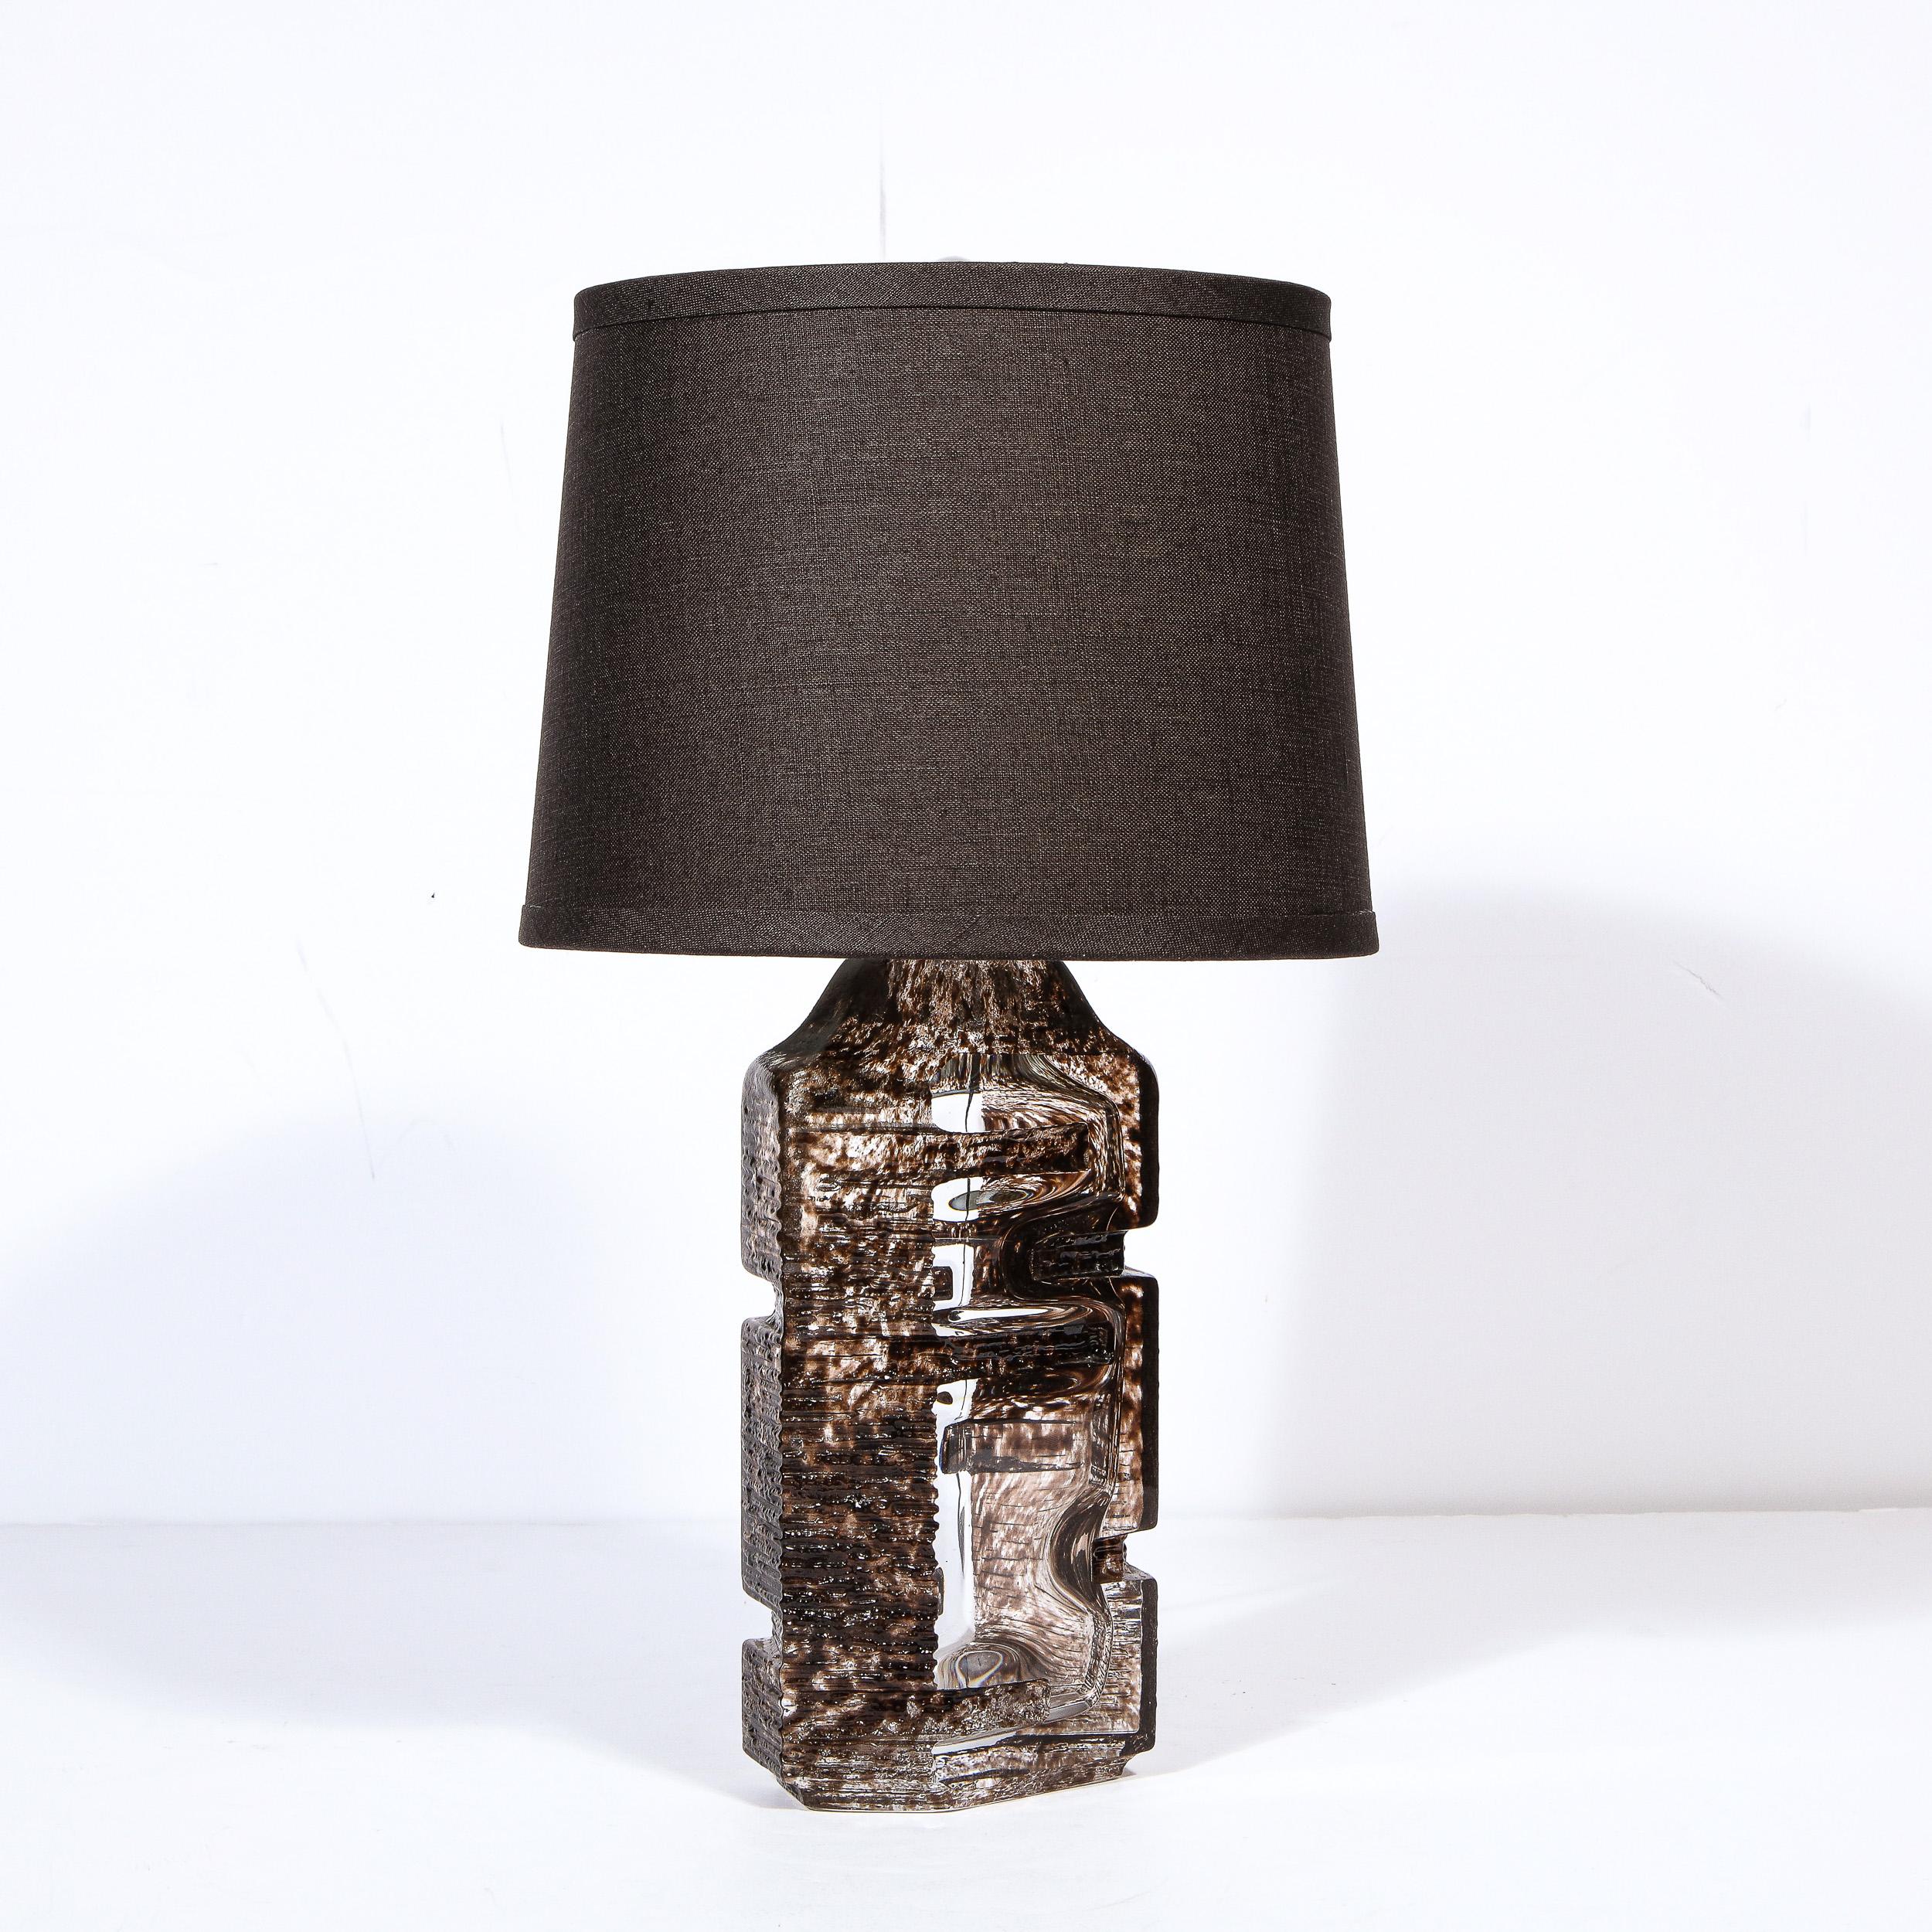 Mid-Century Modern Brutalist Handblown Glass Table Lamp Signed Daum In Excellent Condition For Sale In New York, NY